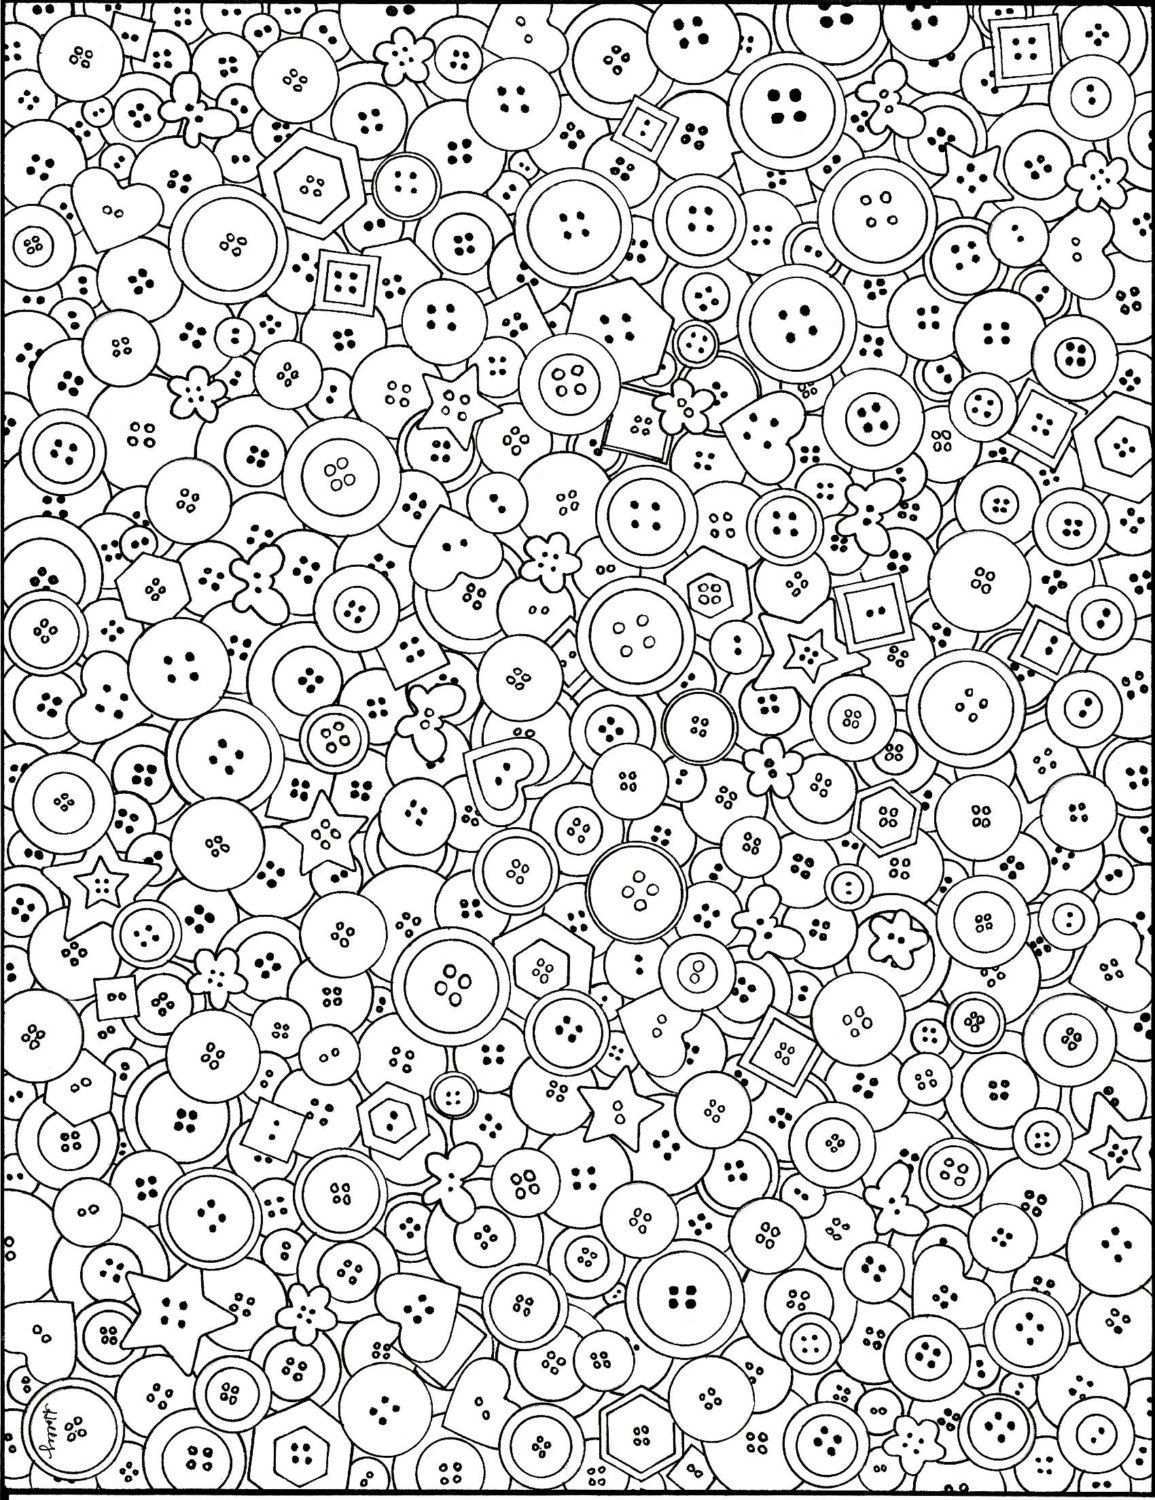 Buttons Coloring Page Geometric Coloring Pages Coloring Pages Abstract Coloring Pages